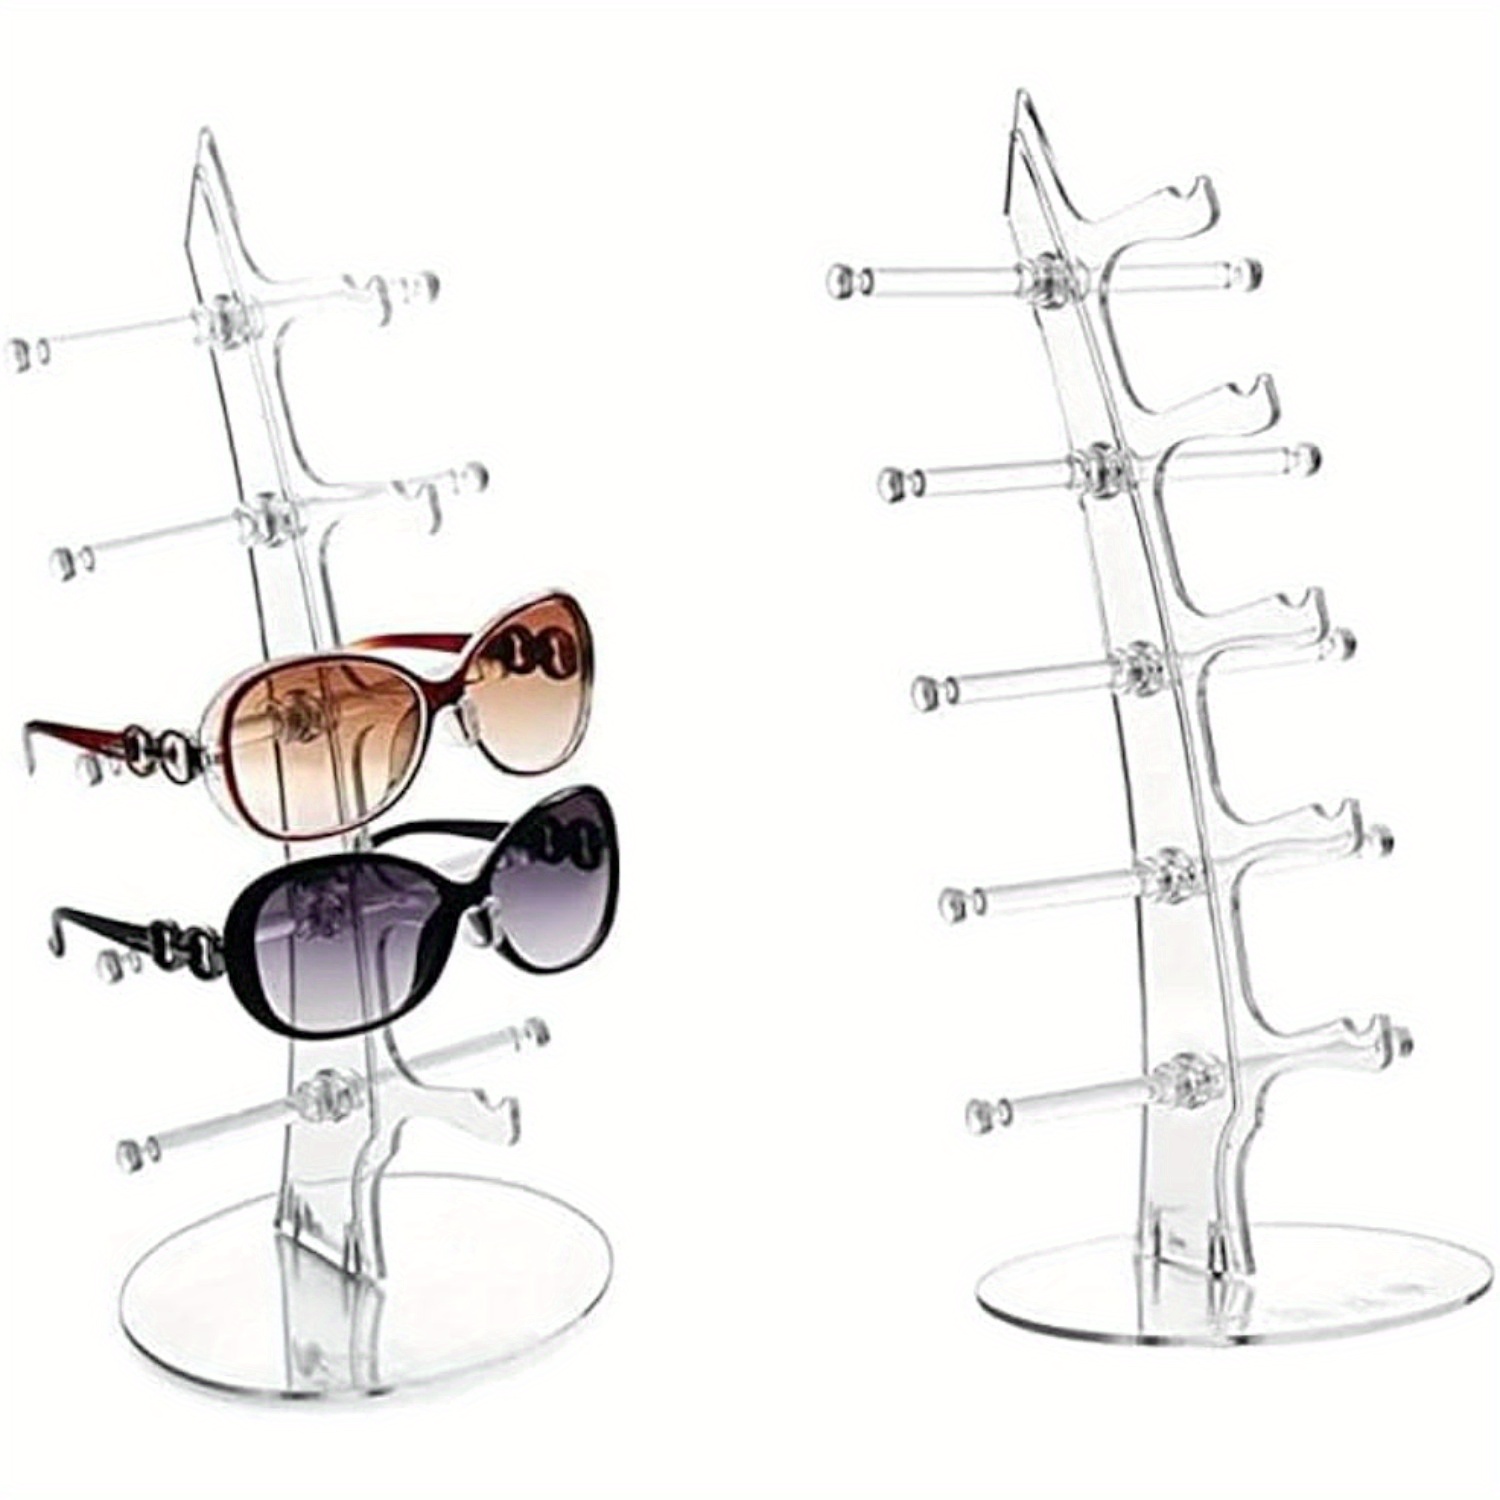 

1pc/2pcs 5 Sunglasses Holder, Clear Acrylic Glasses Rack, Eyeglasses Display Stand, Storage Organizer For Jewelry Eyewear, Display Stand, Home Organization And Storage, Bedroom Accessories